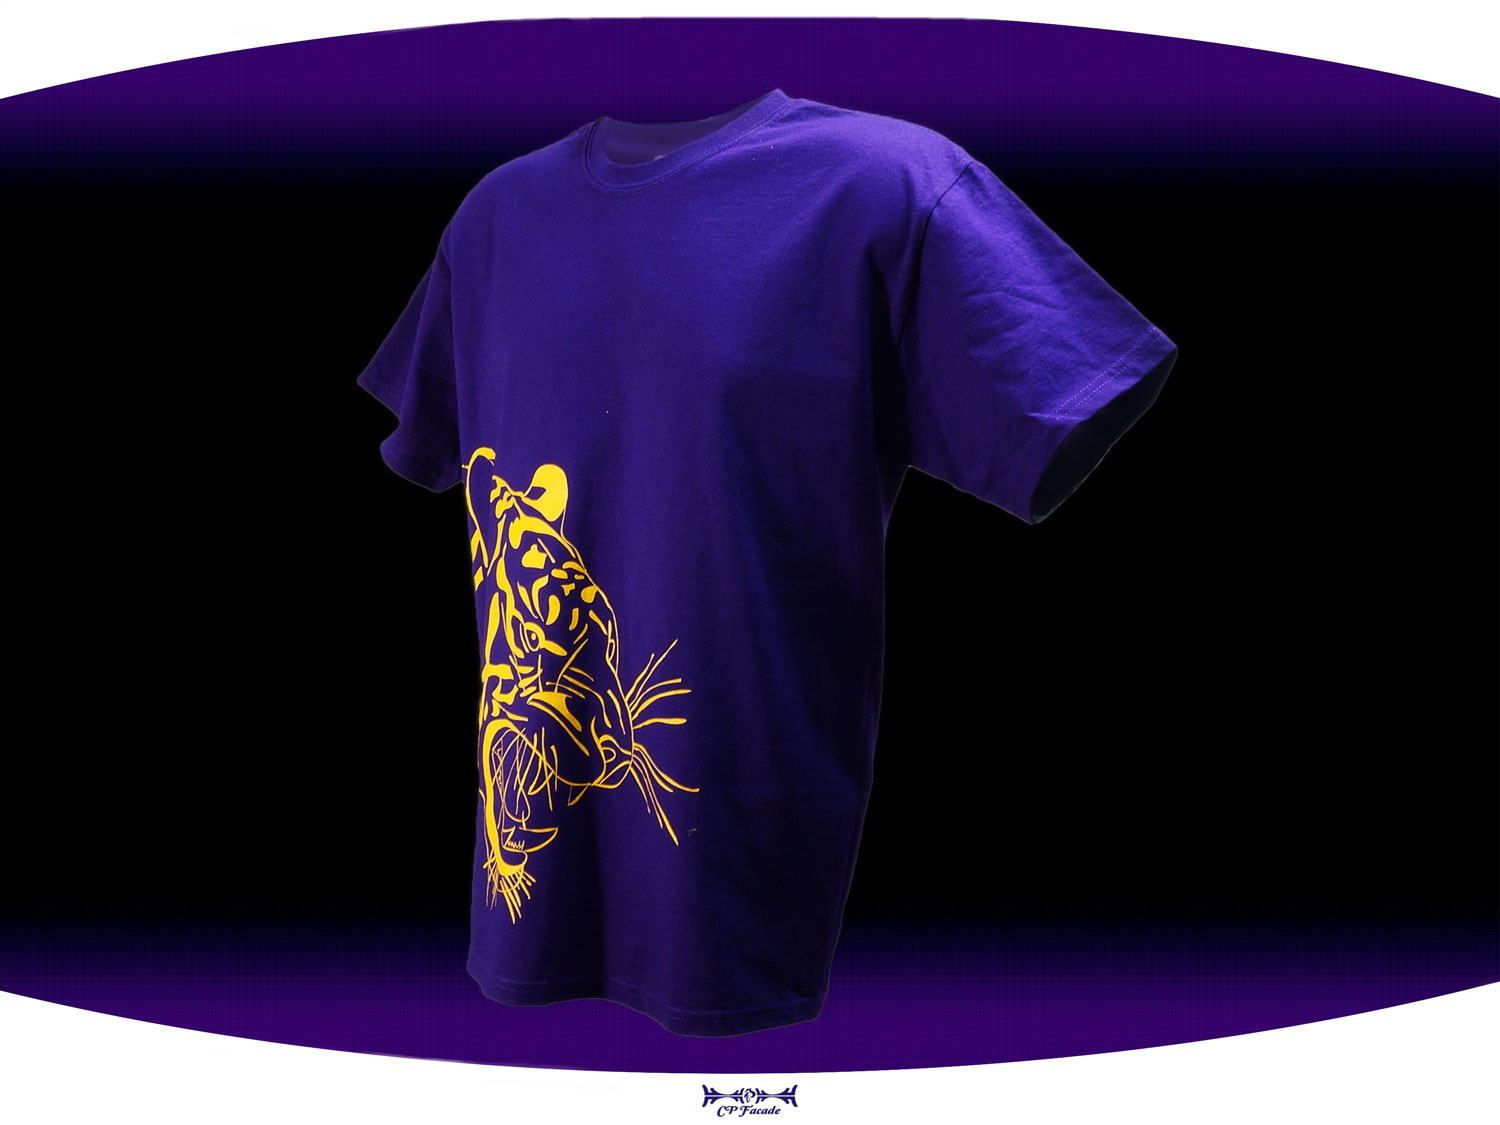 Purple screenprinted  LSU t-shirt with a gold outline of a tiger face